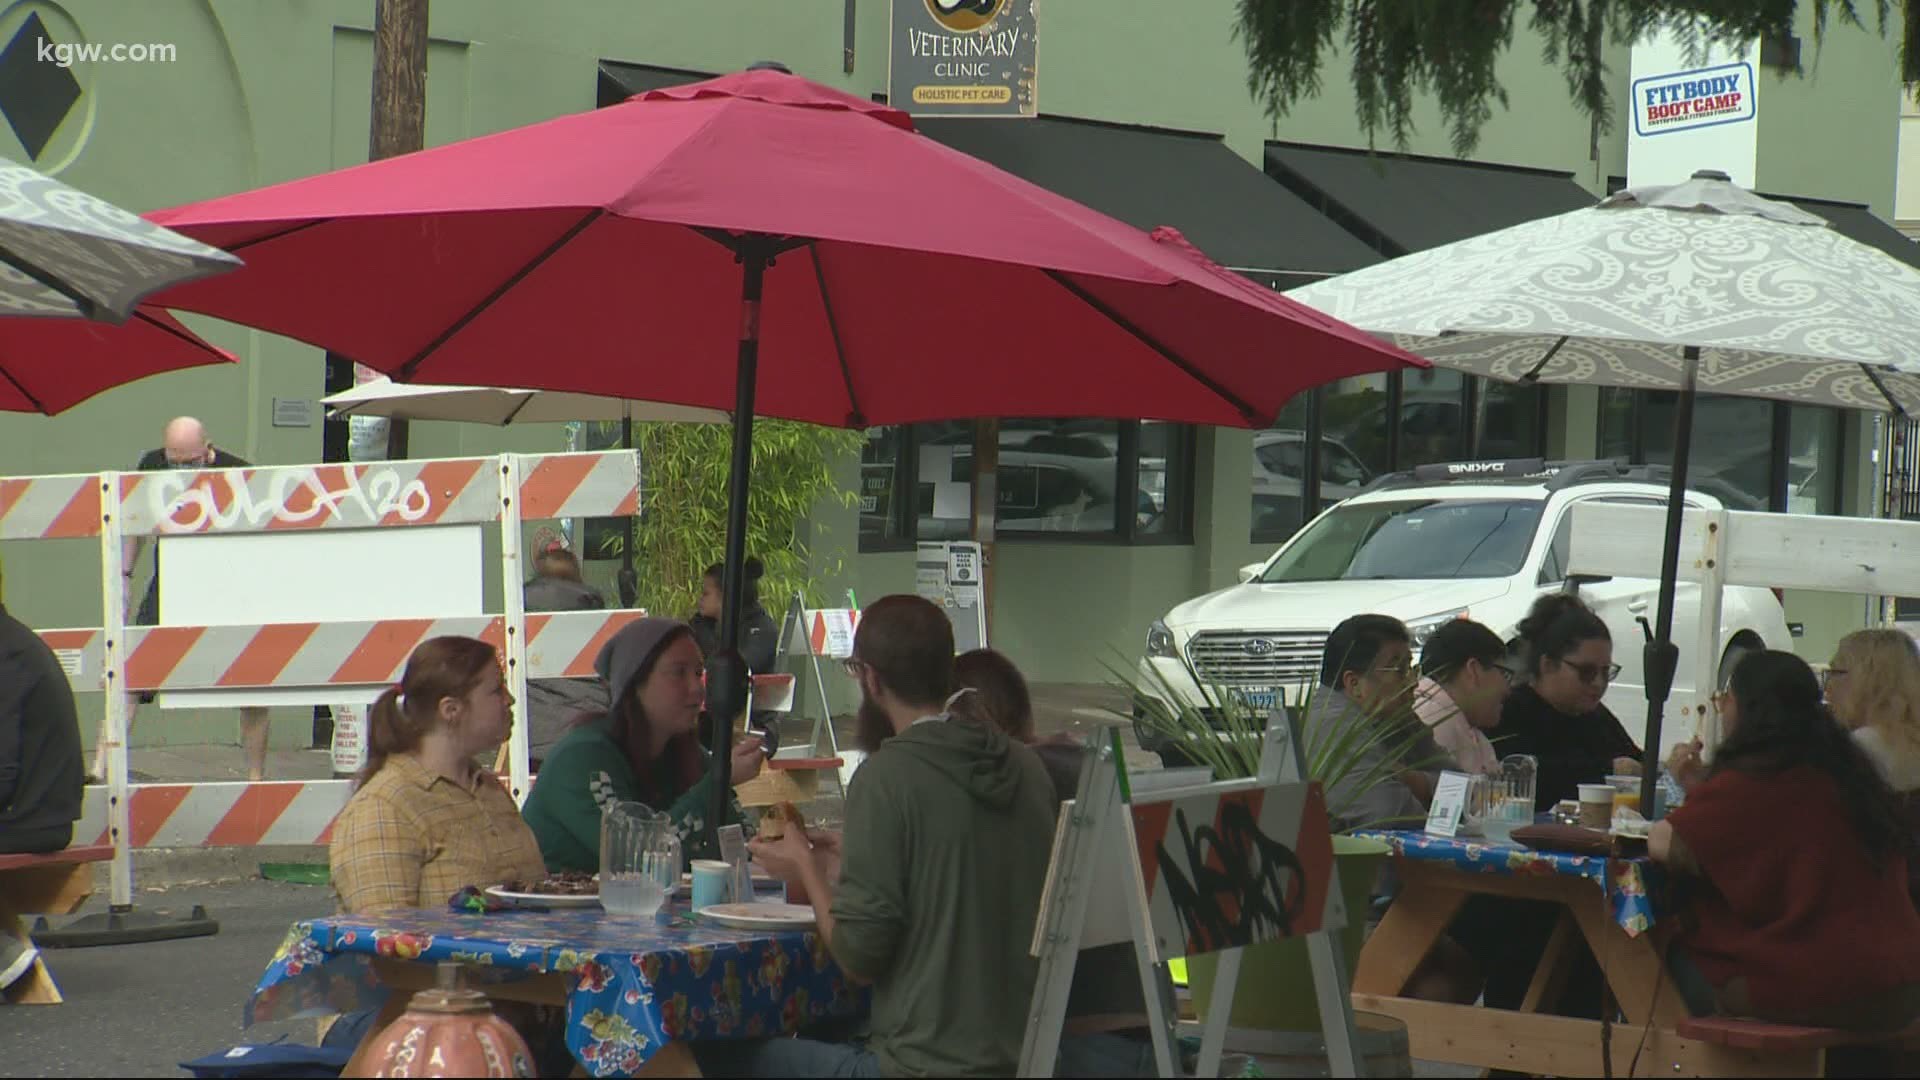 Portland is extending its outdoor seating program for restaurants struggling due to the COVID-19 pandemic. Morgan Romero reports.